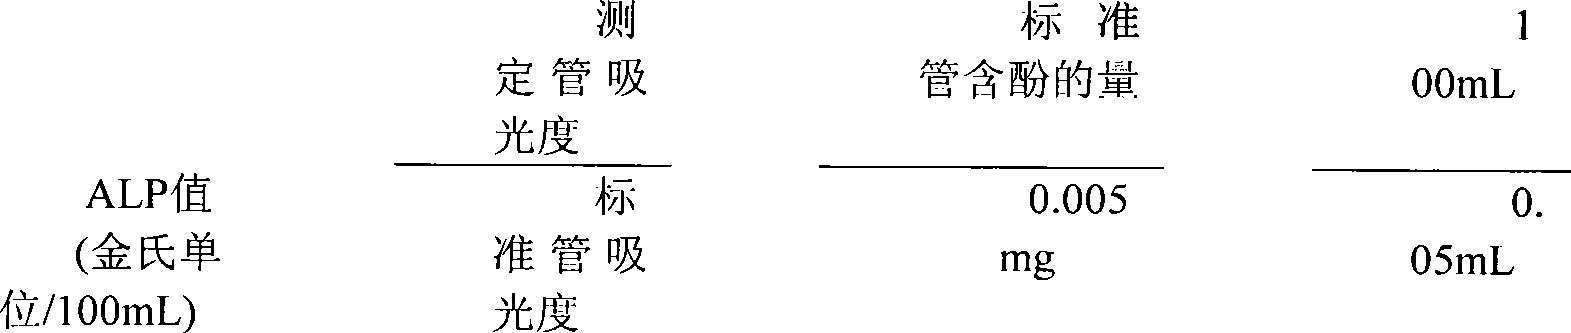 Traditional Chinese medicine composition capable of preventing and treating osteoporosis and preparation method thereof